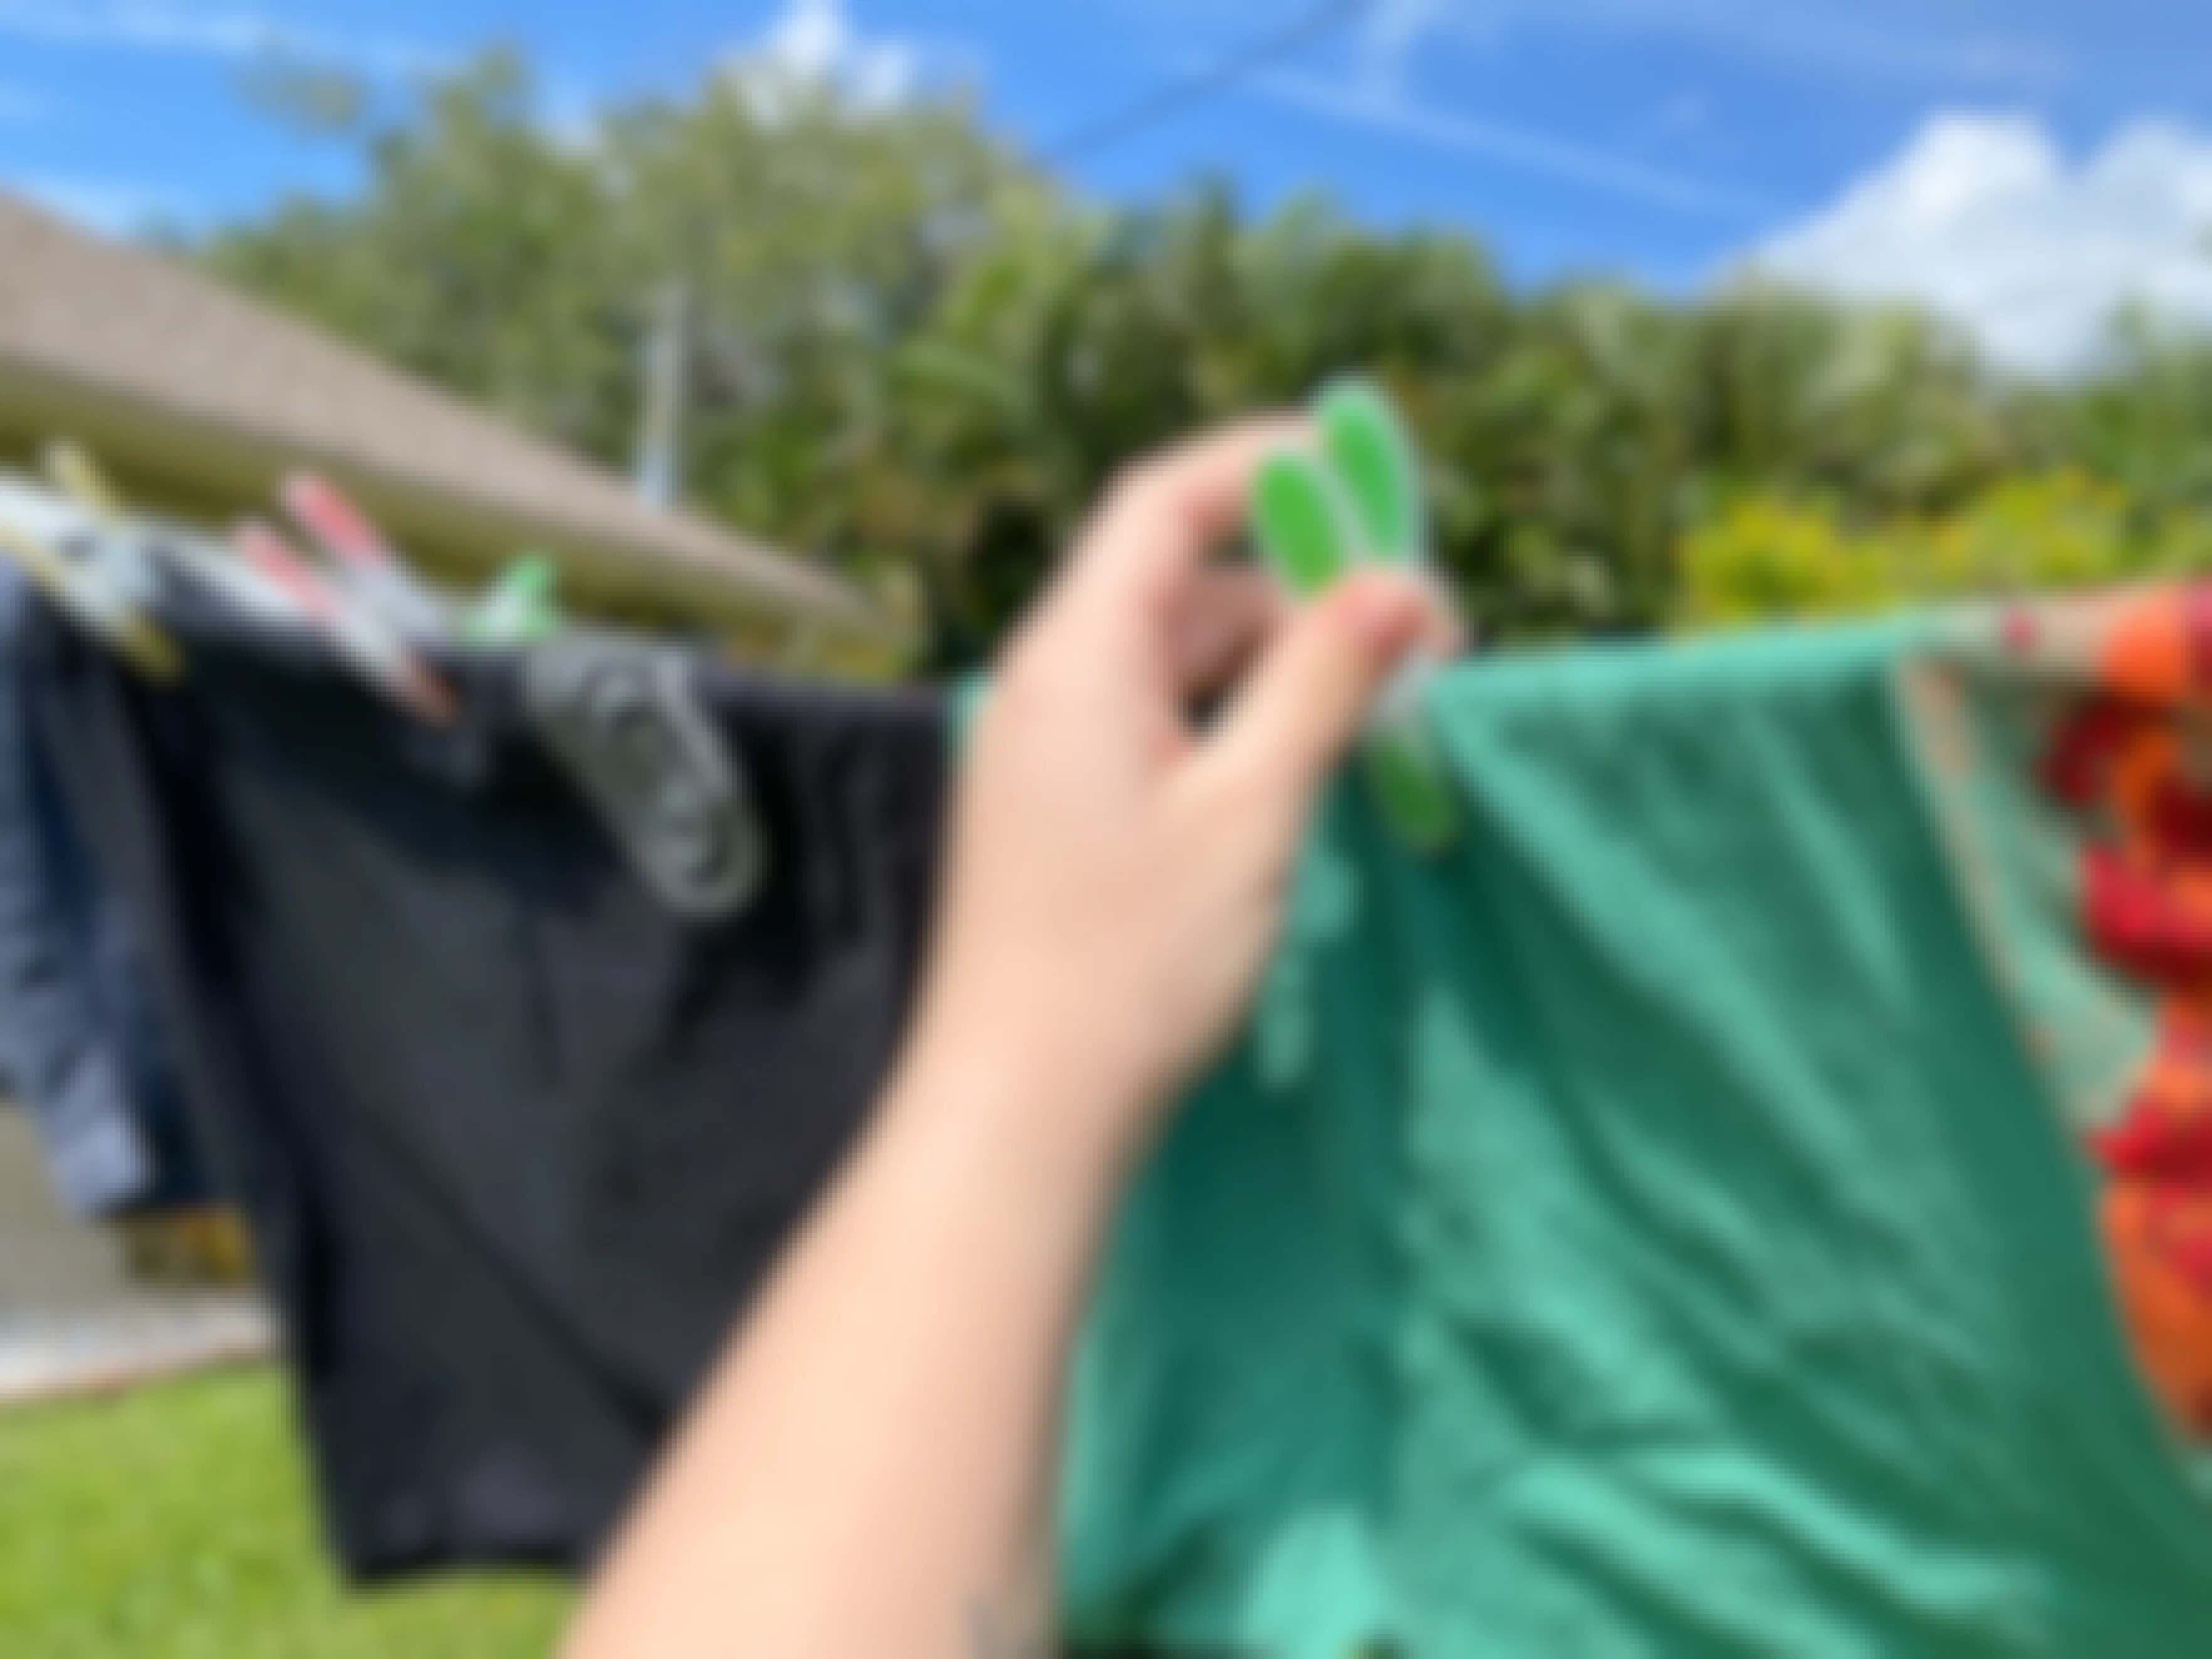 A person's hand using a colorful clothespin to hang a shirt outside to dry on a clothesline.